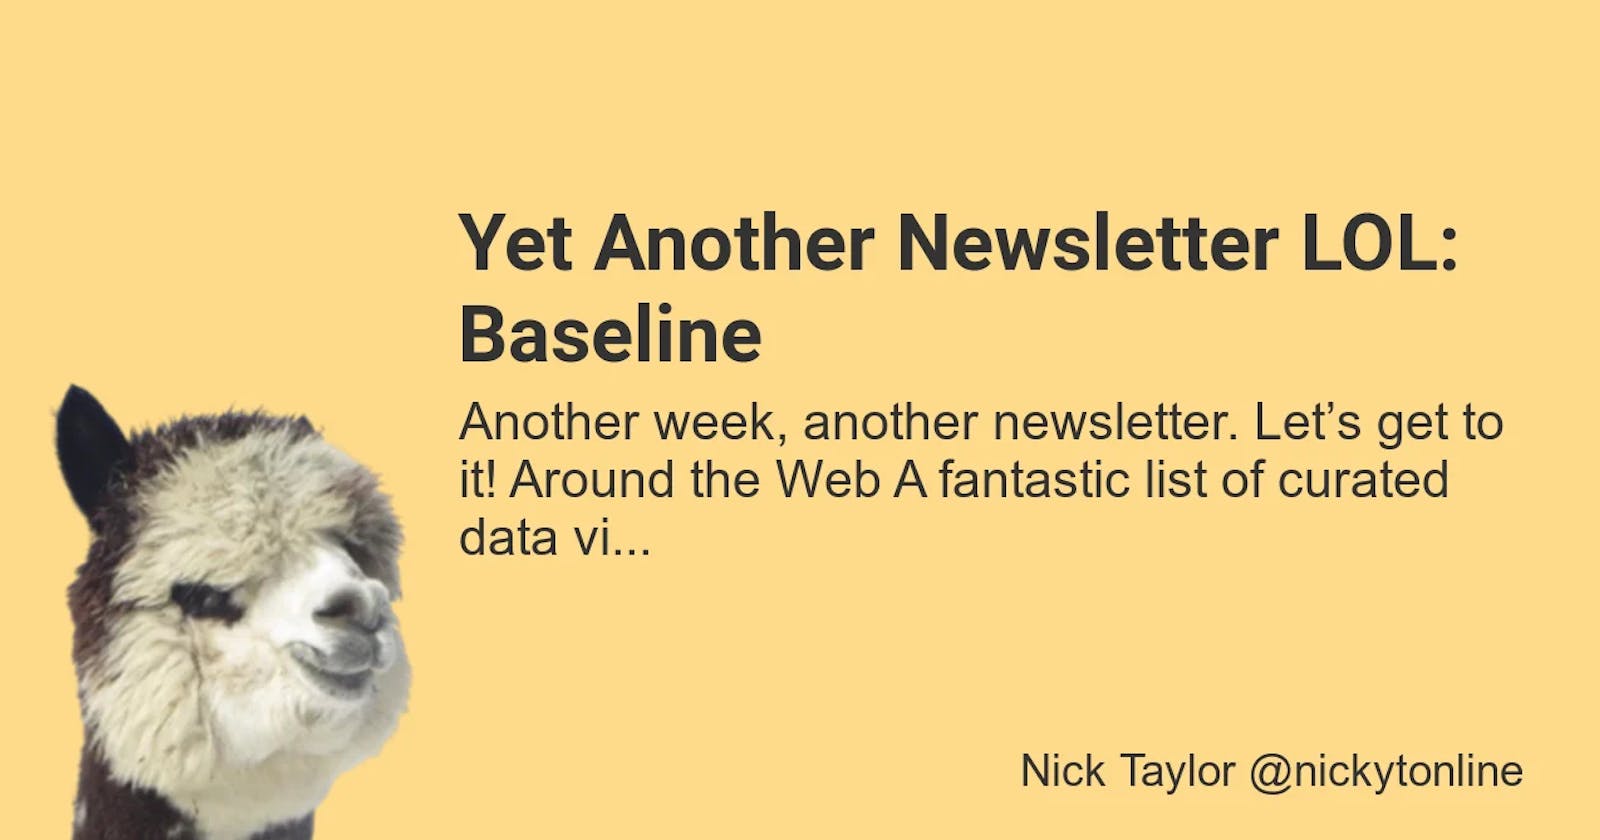 Yet Another Newsletter LOL: Baseline